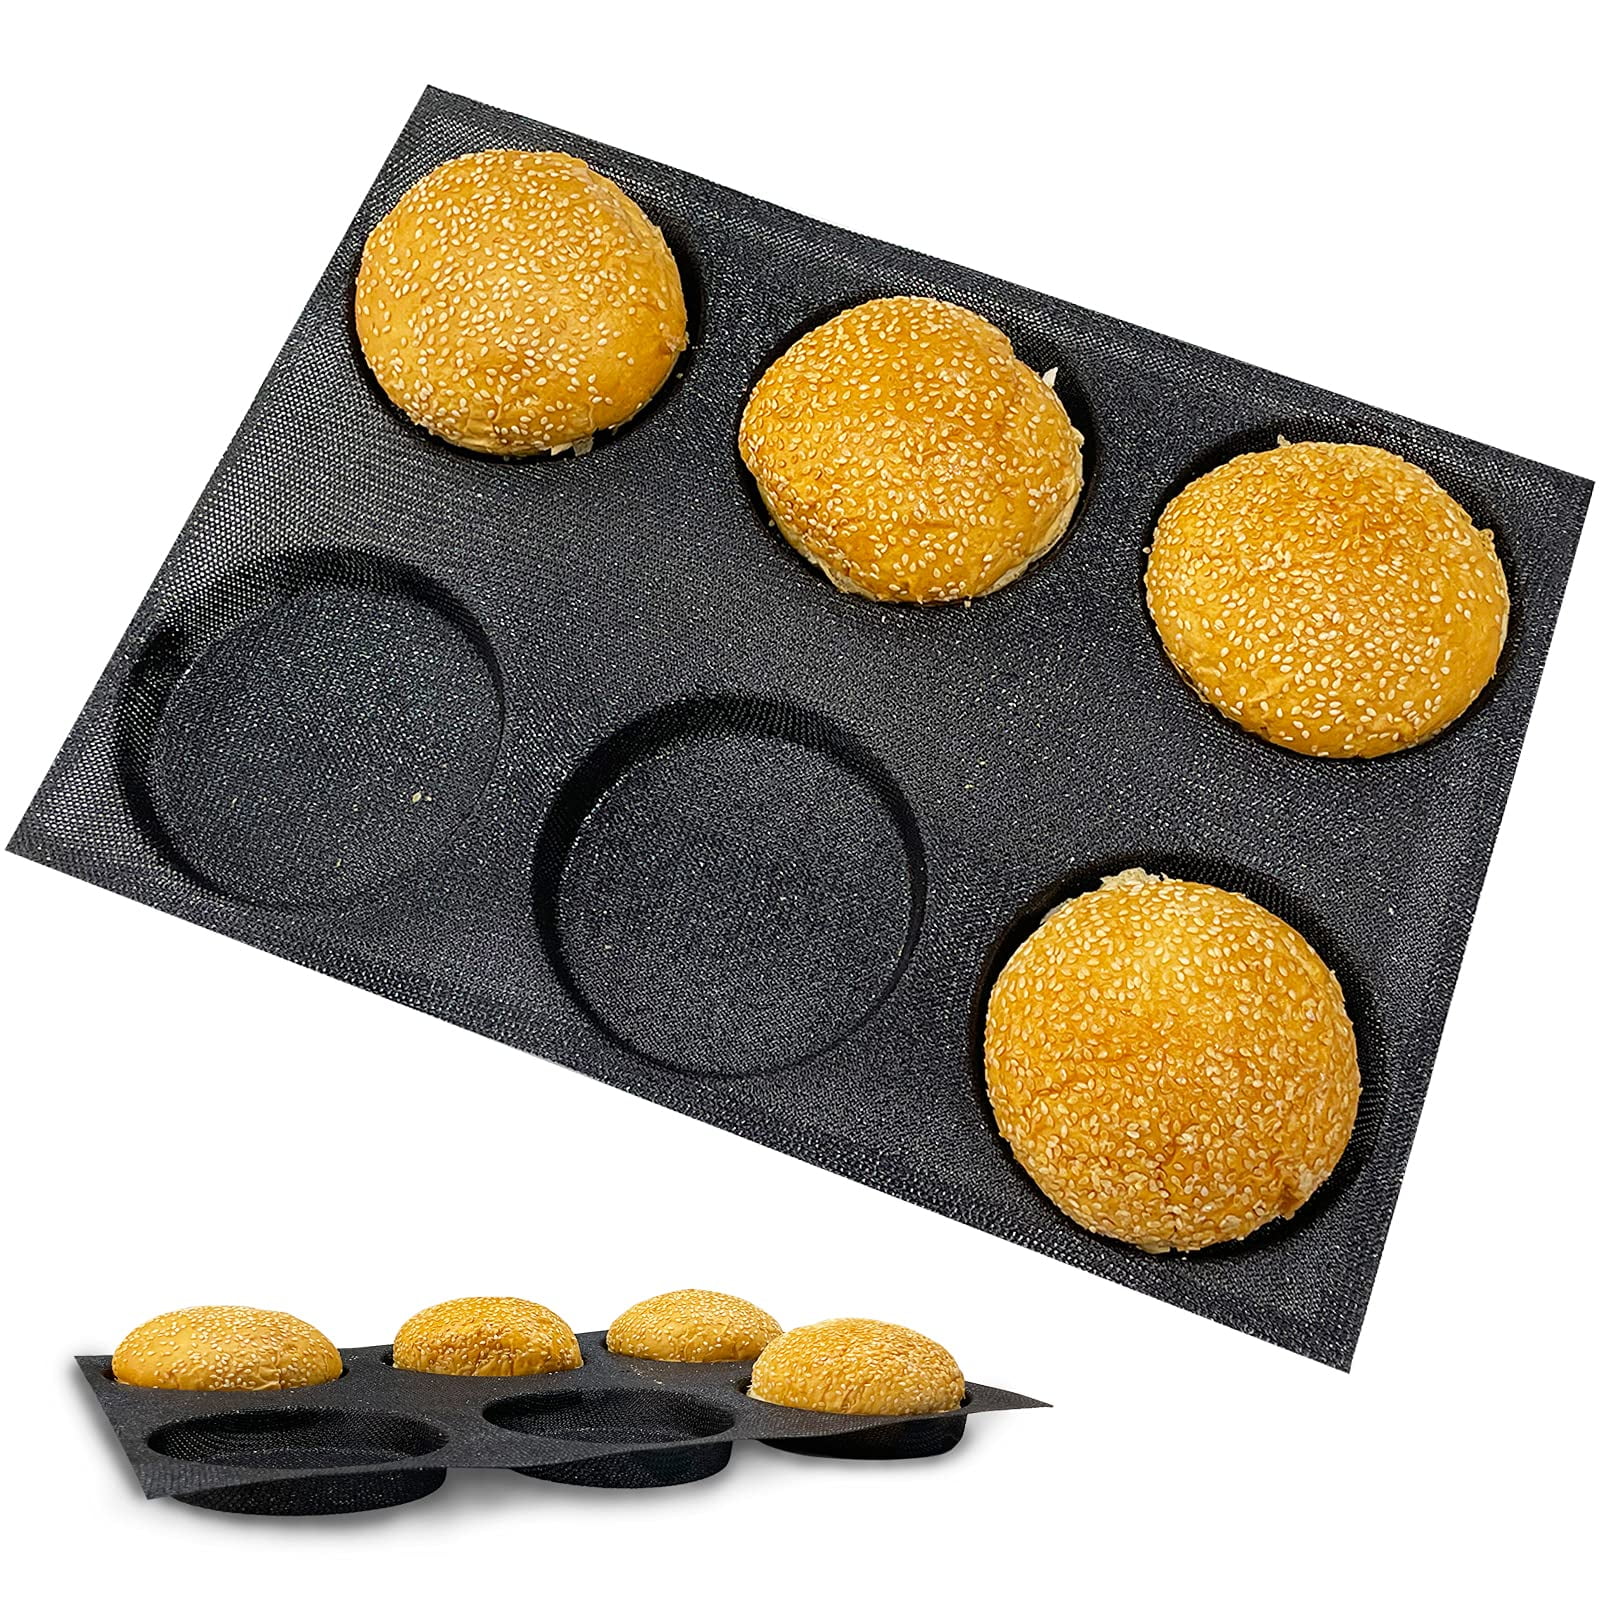 Hamburger Bun Molds (9.25''x13.58''), 6 Cavity Silicone Bread Pans,  Perforated Baking Cupcake Molds, Baking Tools, Kitchen Gadgets, Kitchen  Accessories